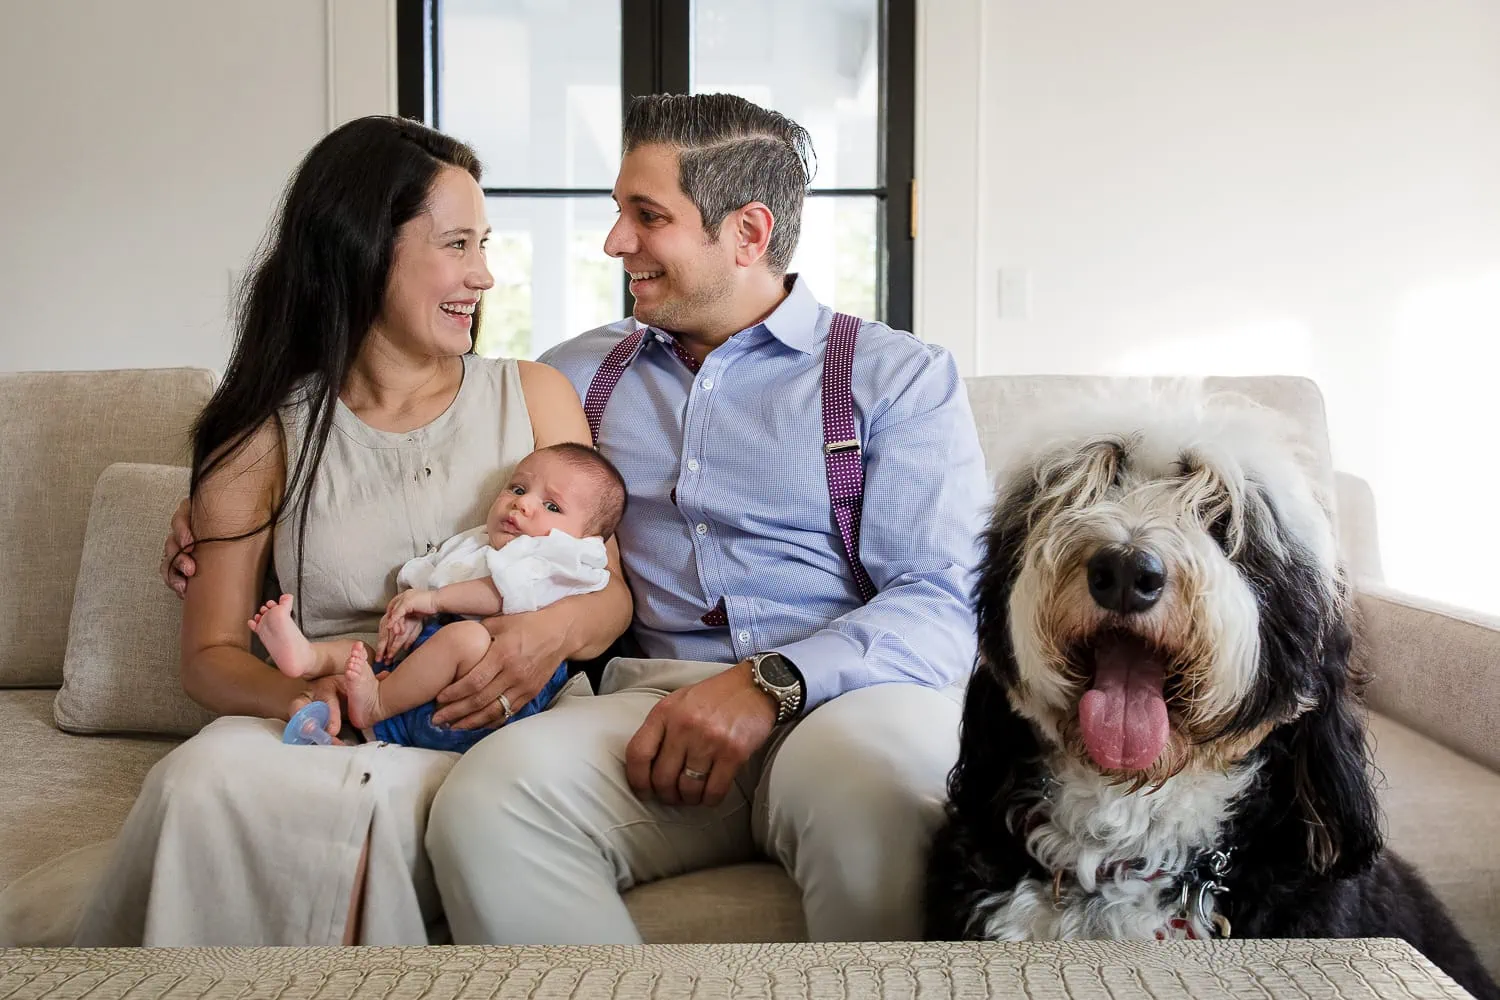 A man and woman sit on a couch holding a baby as their large dog looks at the camera